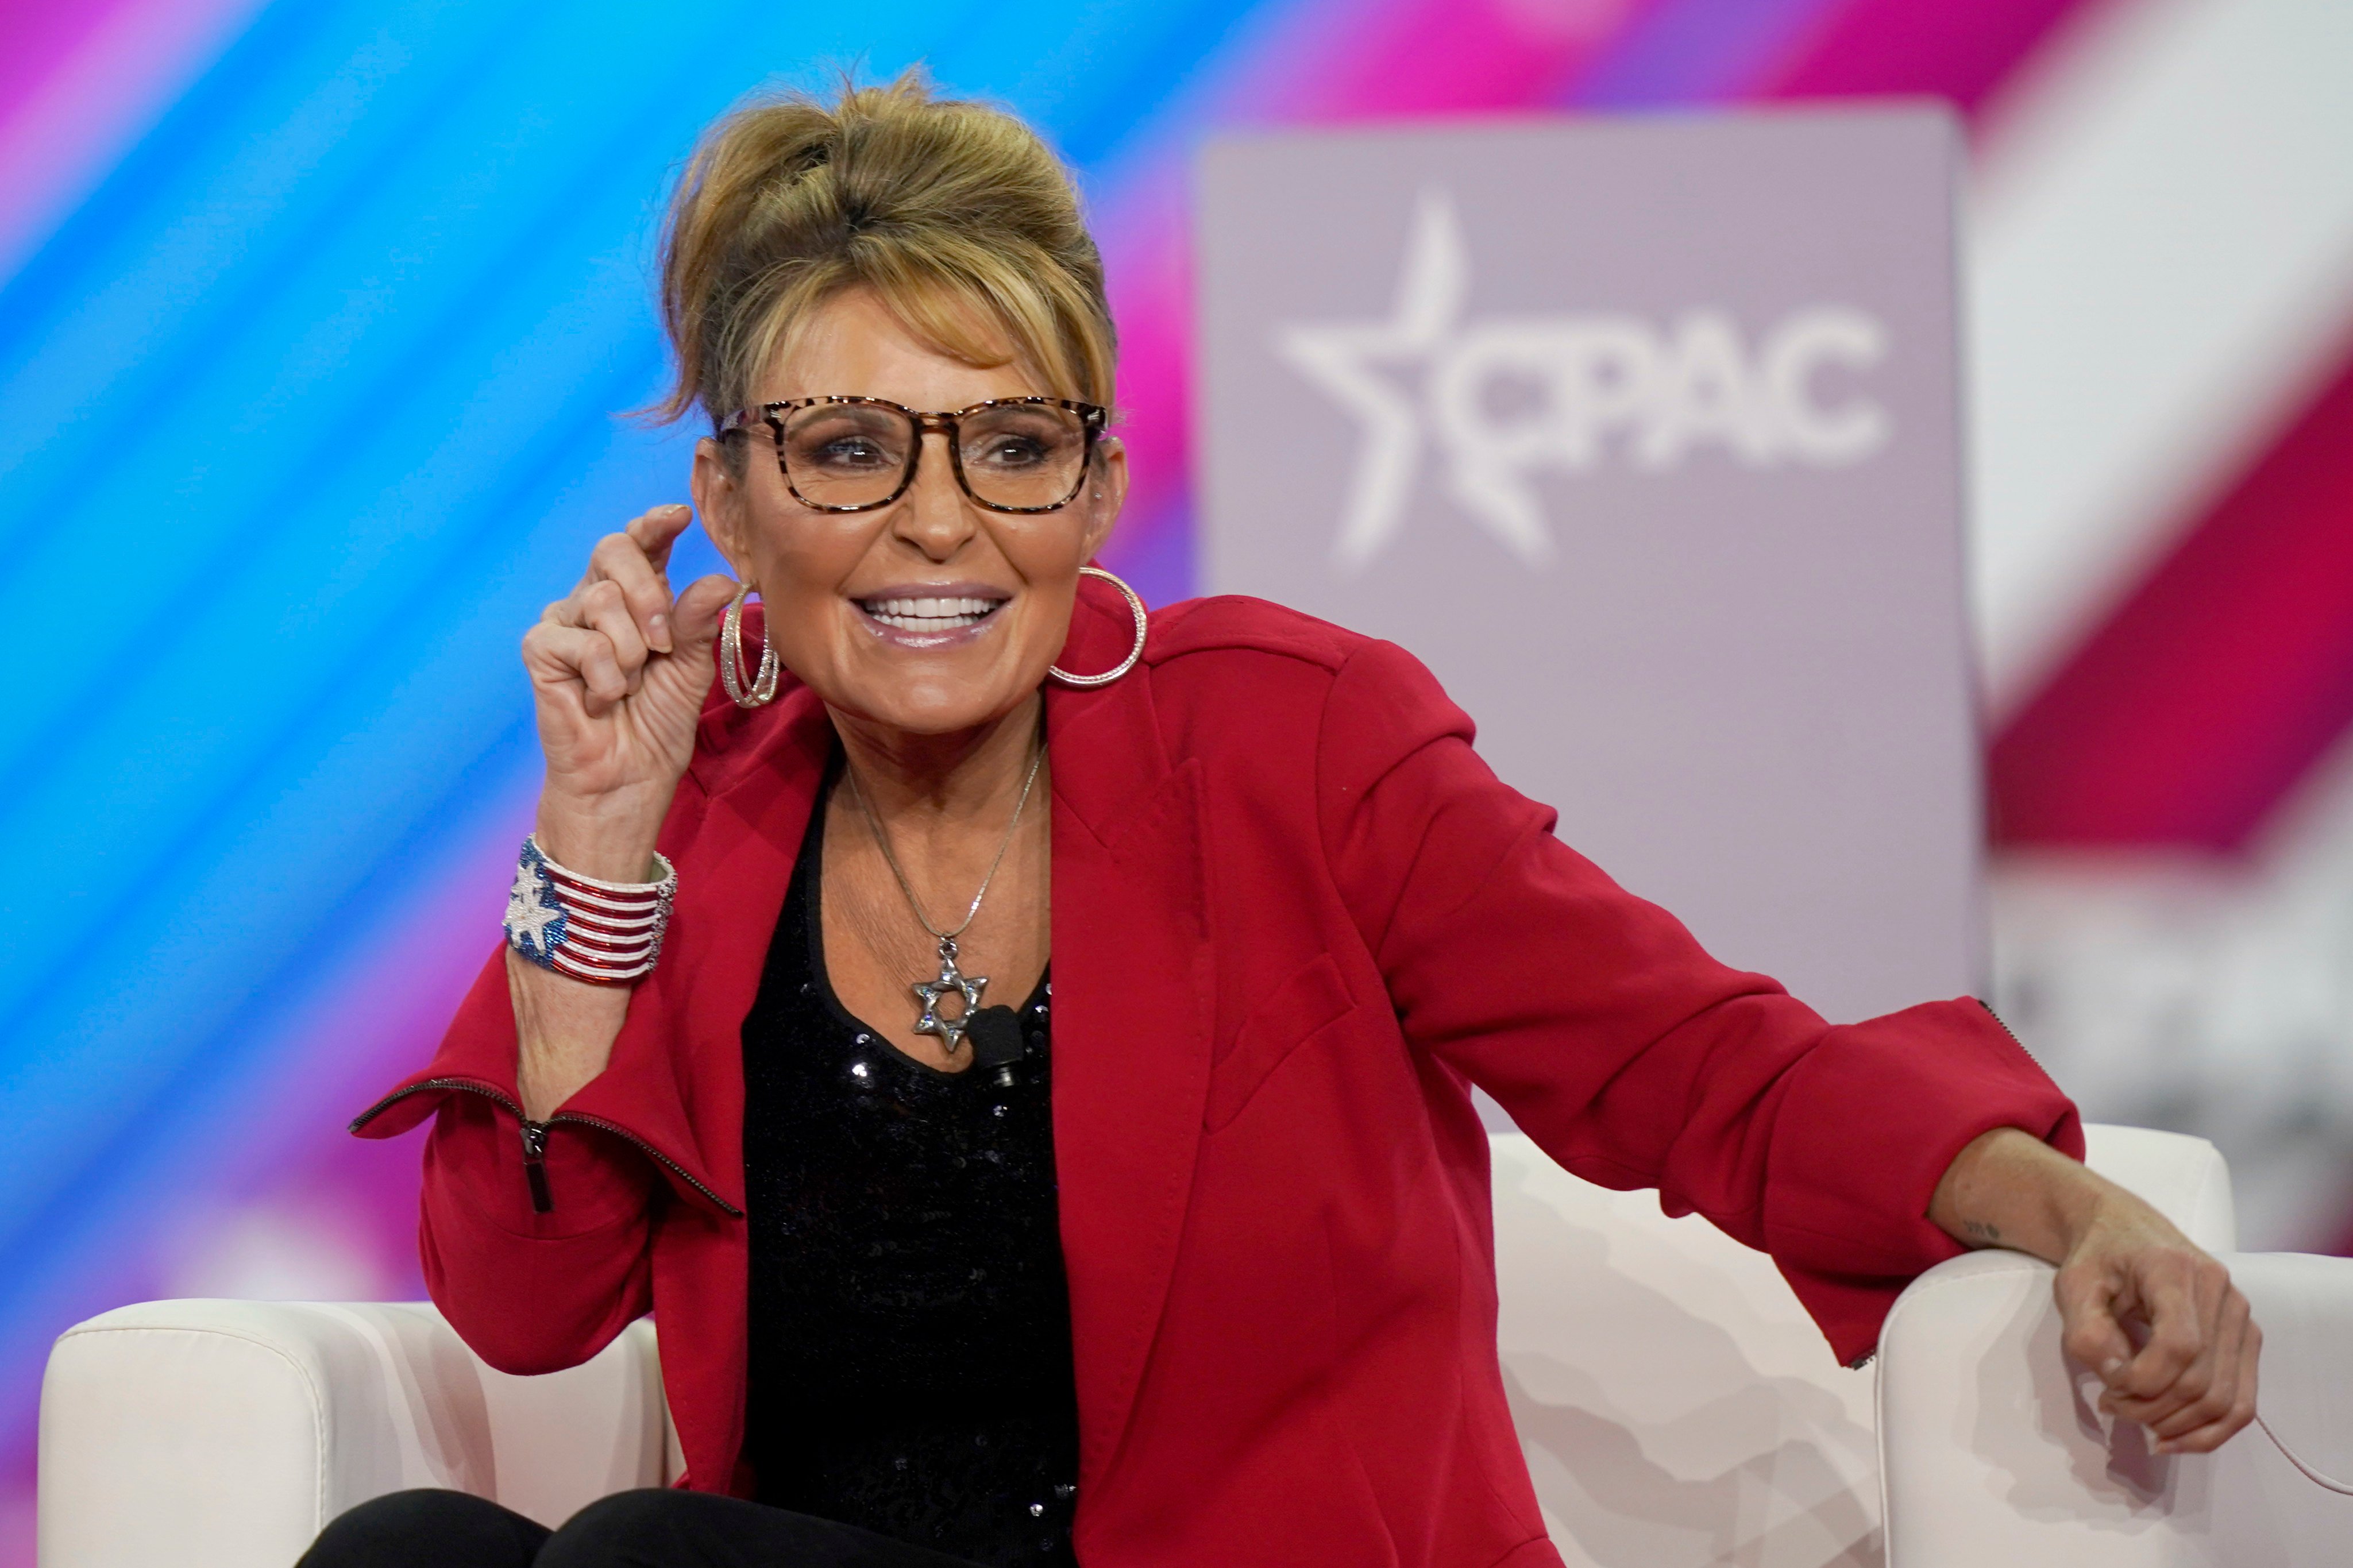 Sarah Palin was one of the world’s most controversial politicians, but what is the former Alaska governor up to now? Photo: AP